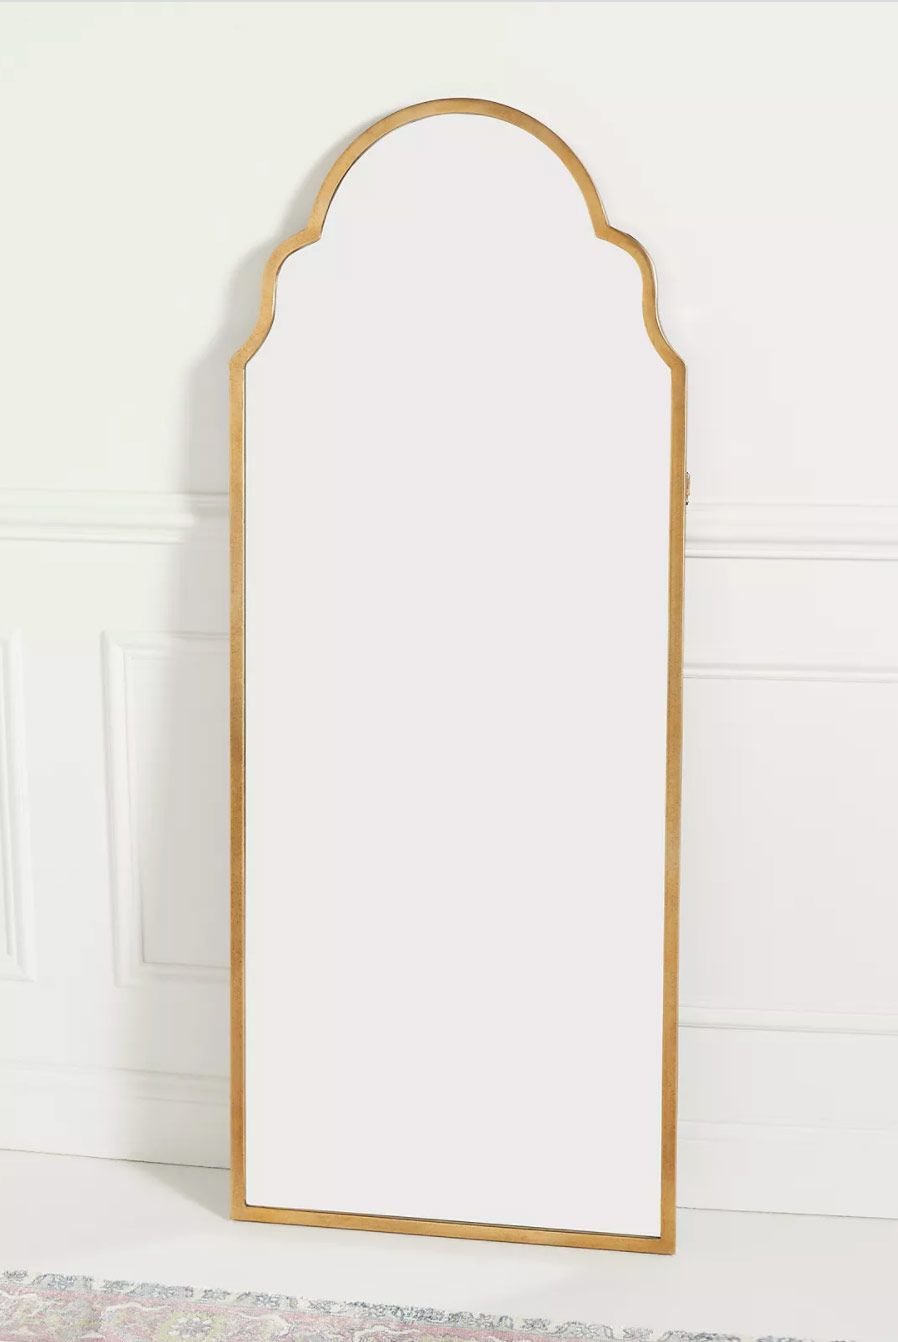 Where can I find the exact mirror quality of luxury brands like